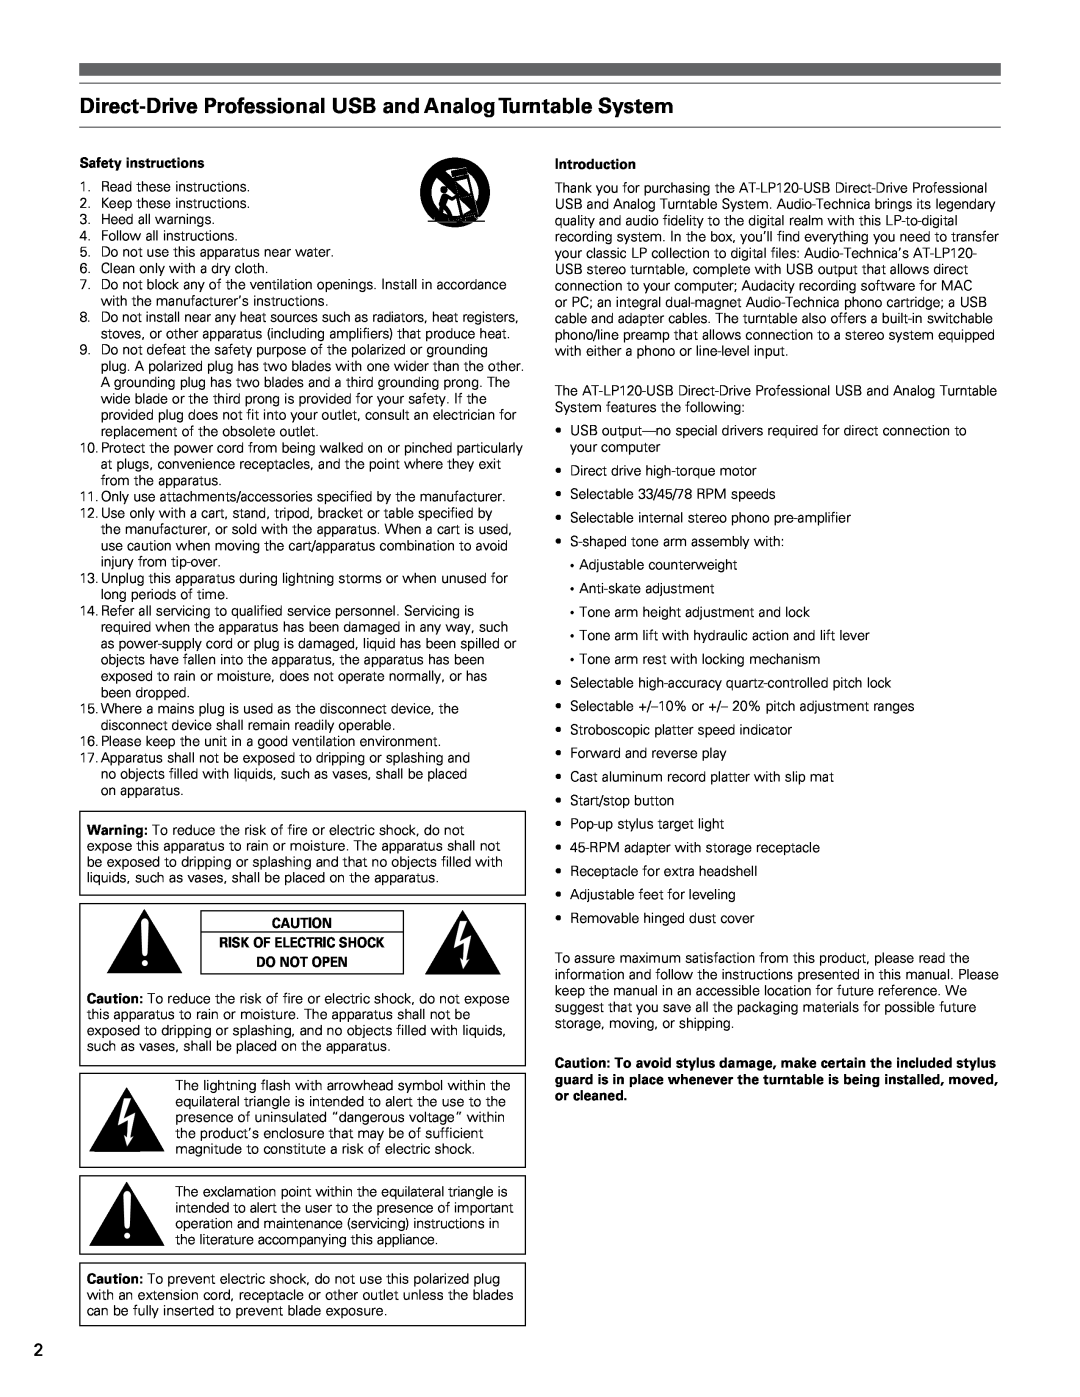 Audio-Technica AT-LP120-USB manual Safety instructions, Risk Of Electric Shock Do Not Open, Introduction 